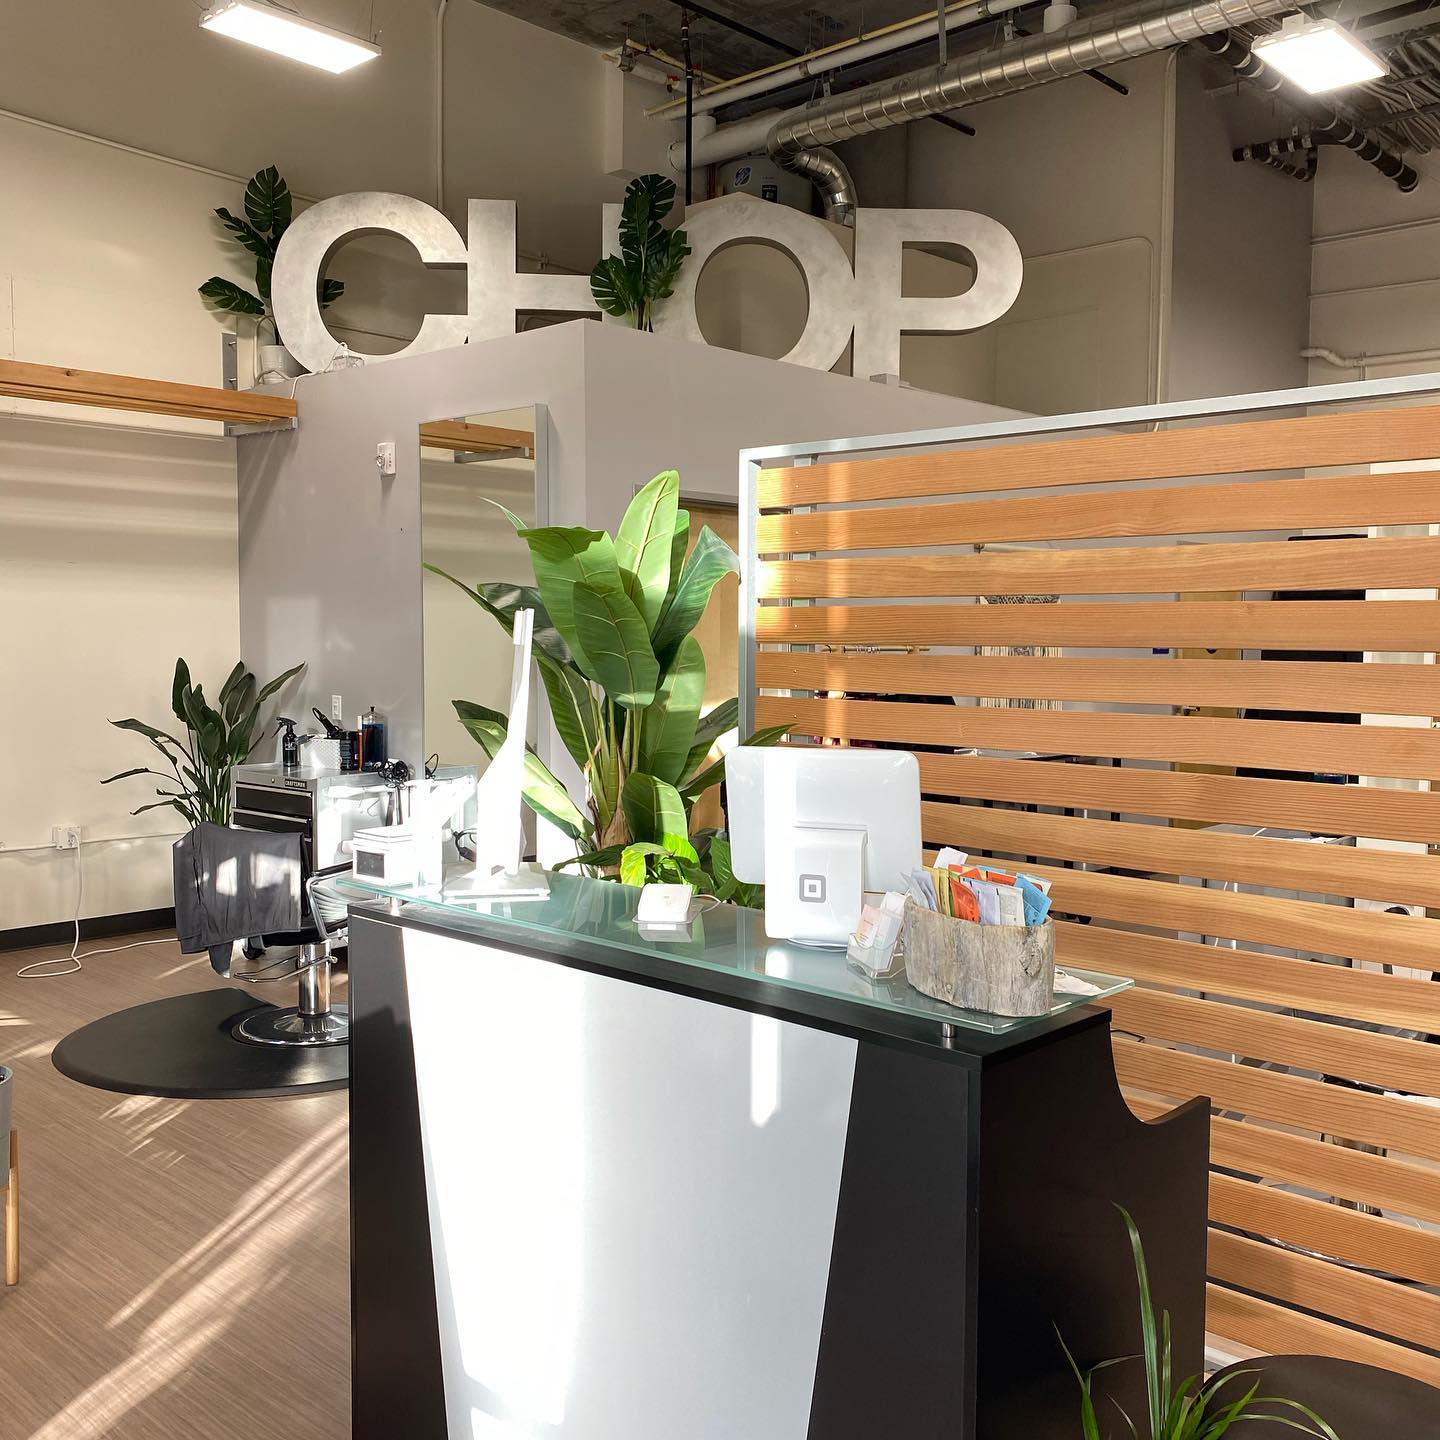 An image of the front desk of Chop Salon.